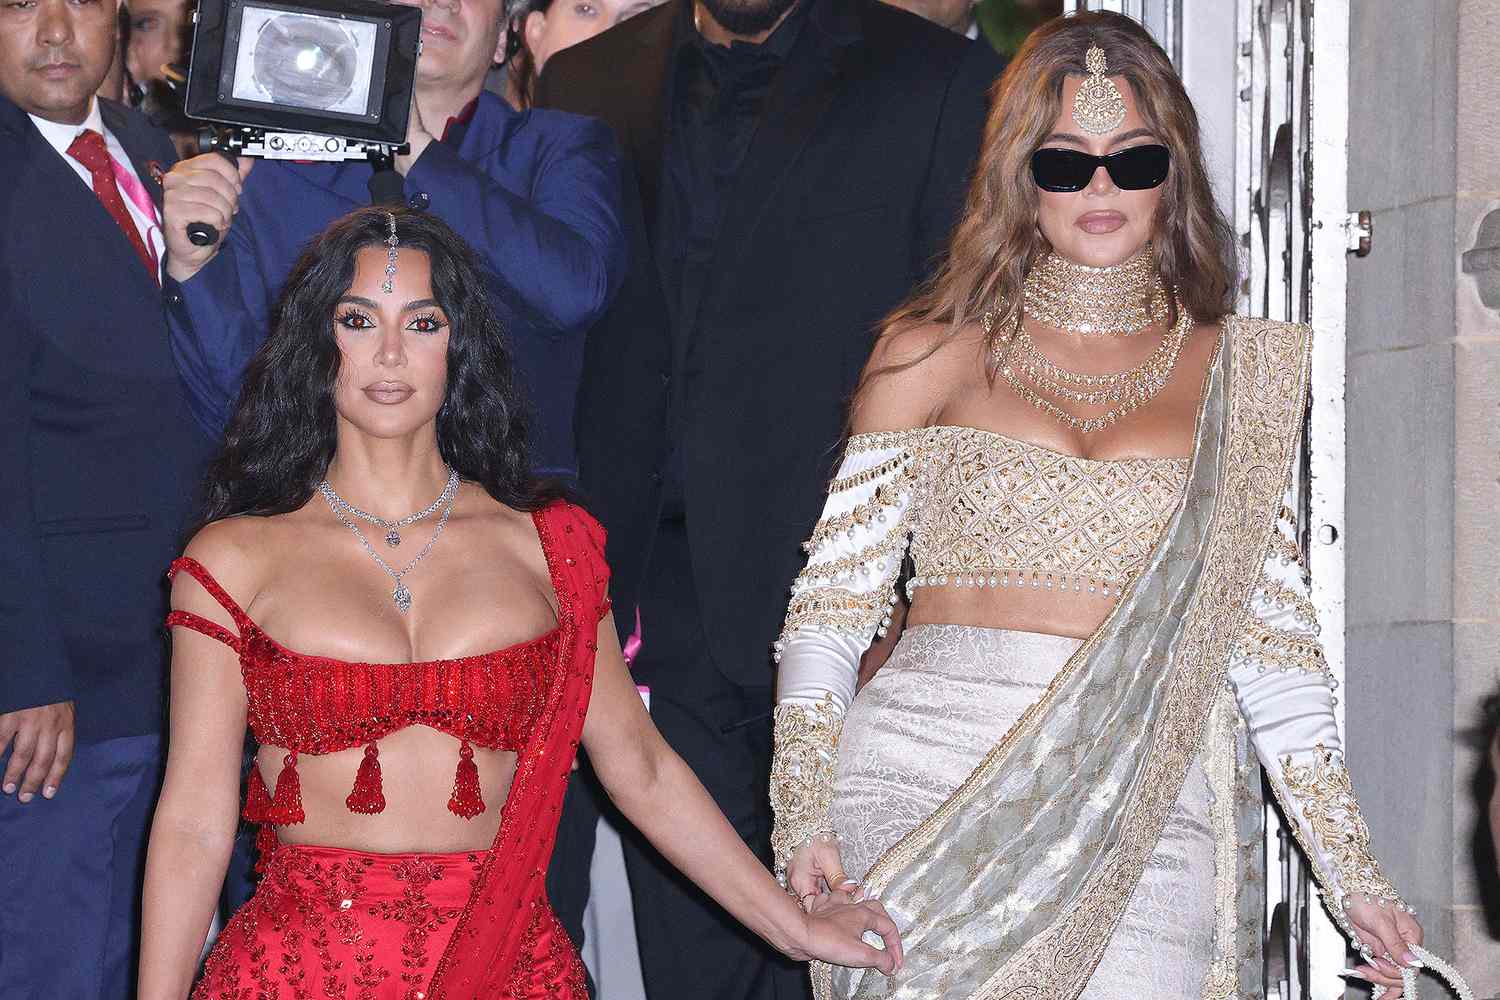 Khloé Kardashian Says Billionaire Heir Wedding with Sister Kim Was Full of the ‘Best Memories with My Bestie’